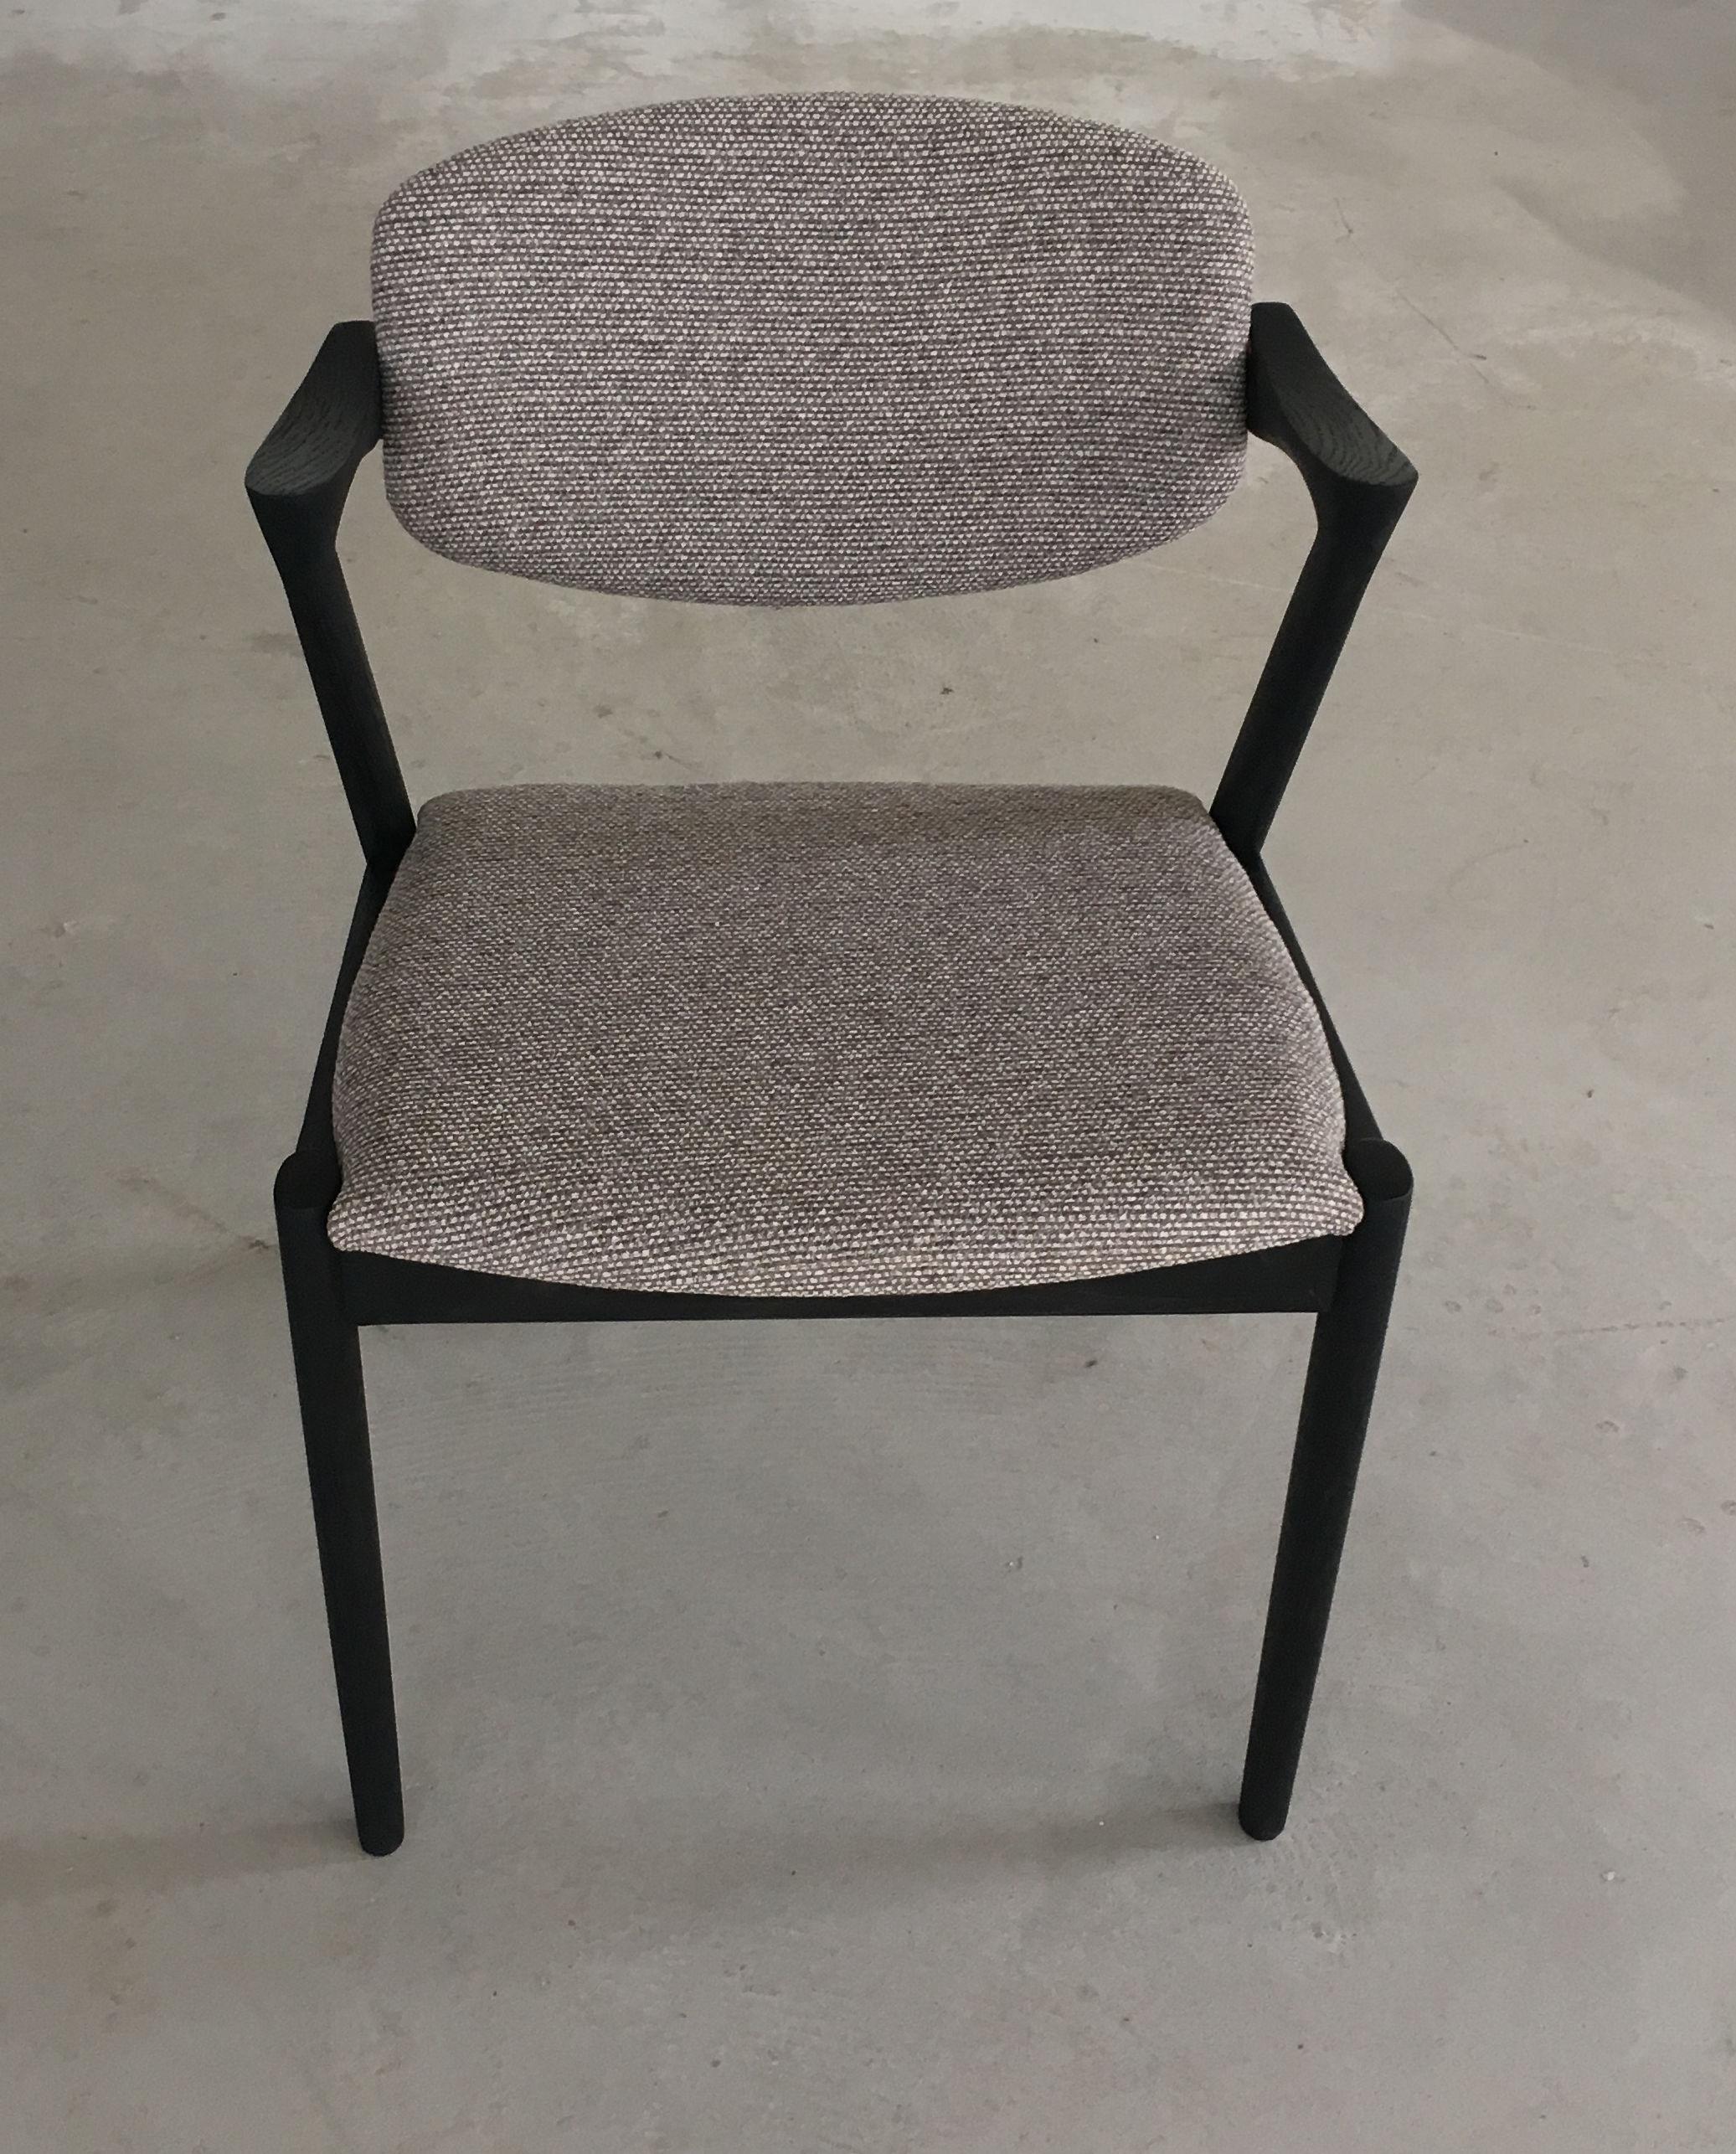 Set of 10 restored and ebonized oak dining chairs, inc. re-upholstery with swivel backrest by Kai Kristiansen for Schous Møbelfabrik.

The chairs have Kai Kristiansen’s typical light and elegant design that make them fit in easily where you want